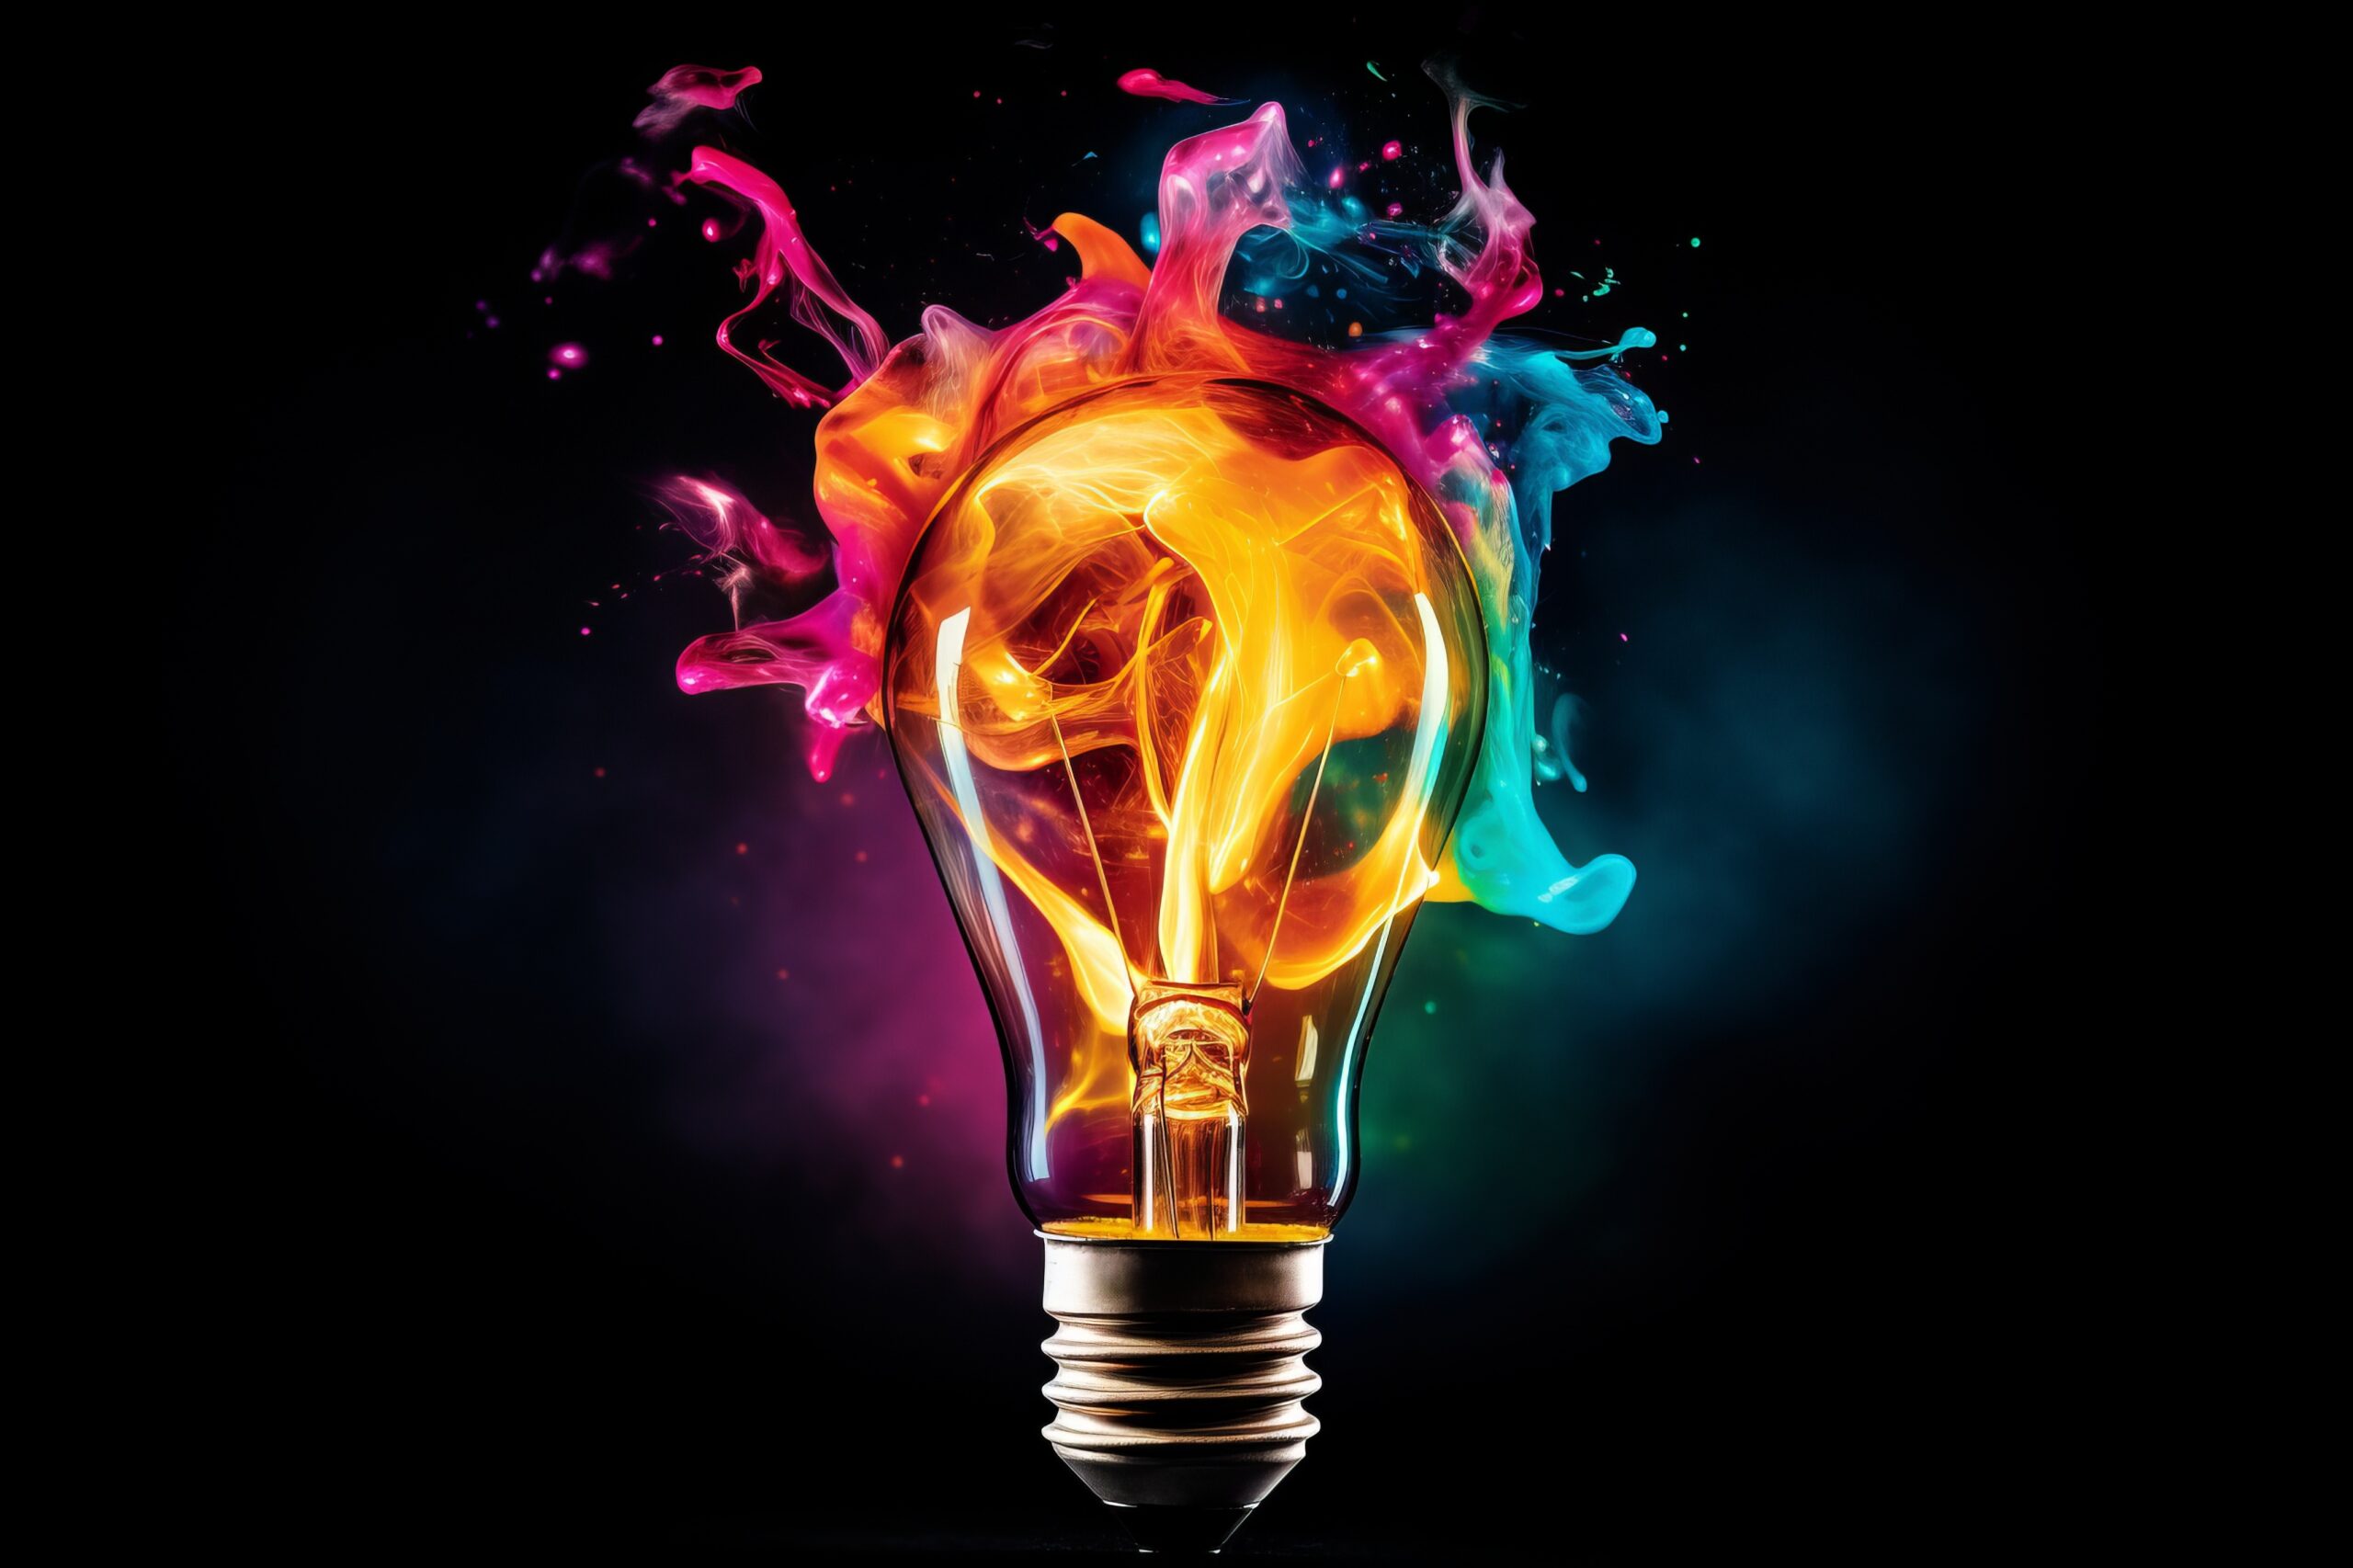 Image of a bulb emanating colorful creative profitability growth solutions ideas